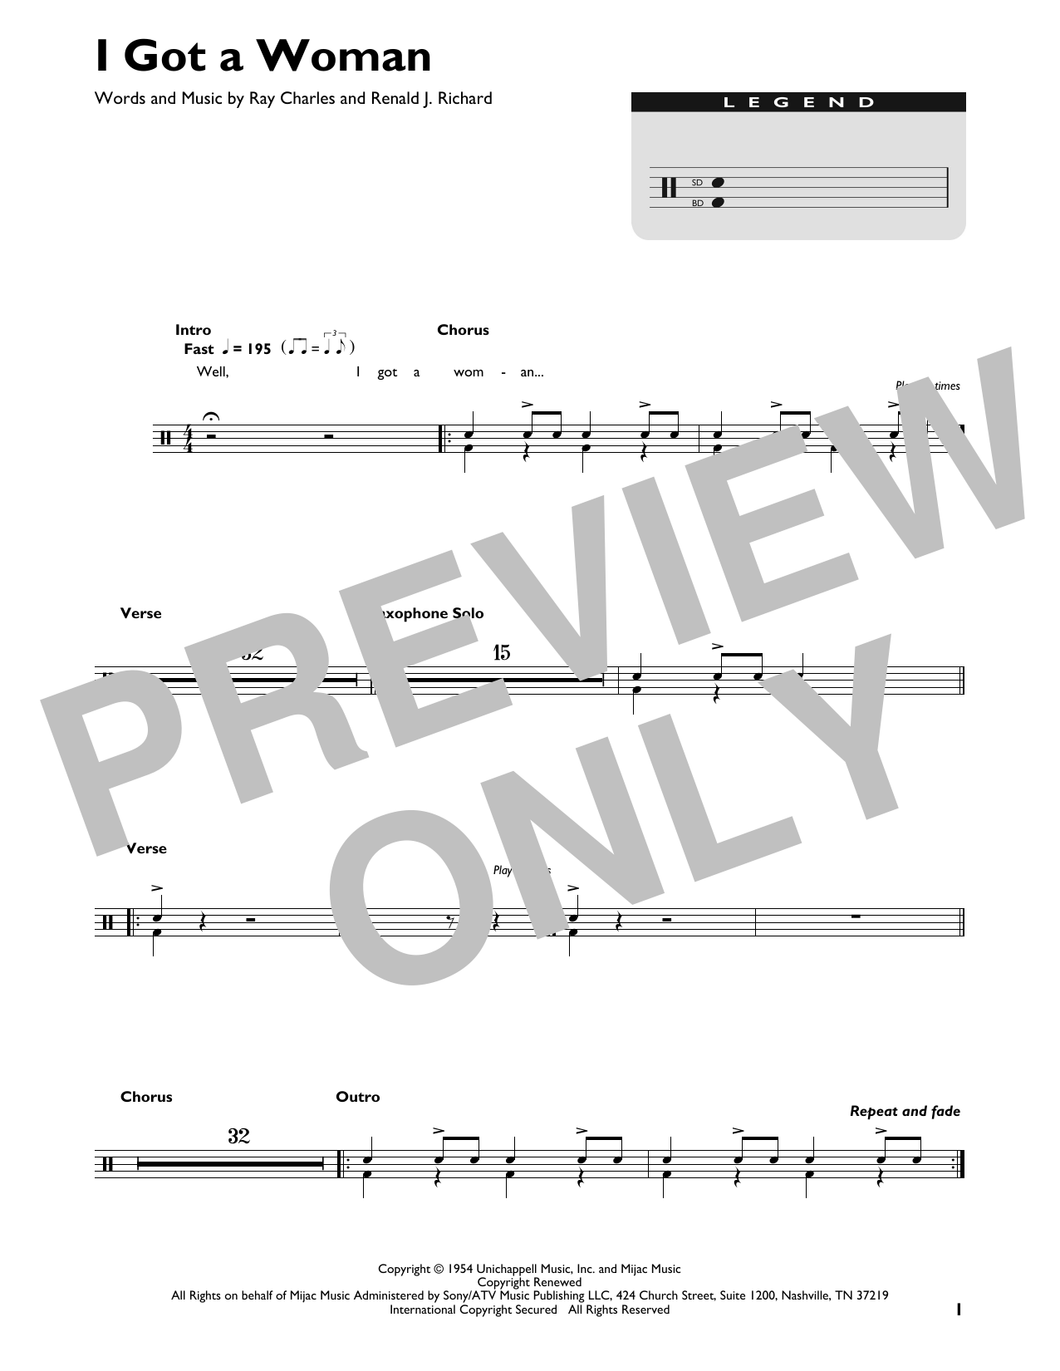 I Got a Woman - Ray Charles - Full Drum Transcription / Drum Sheet Music - SheetMusicDirect DT